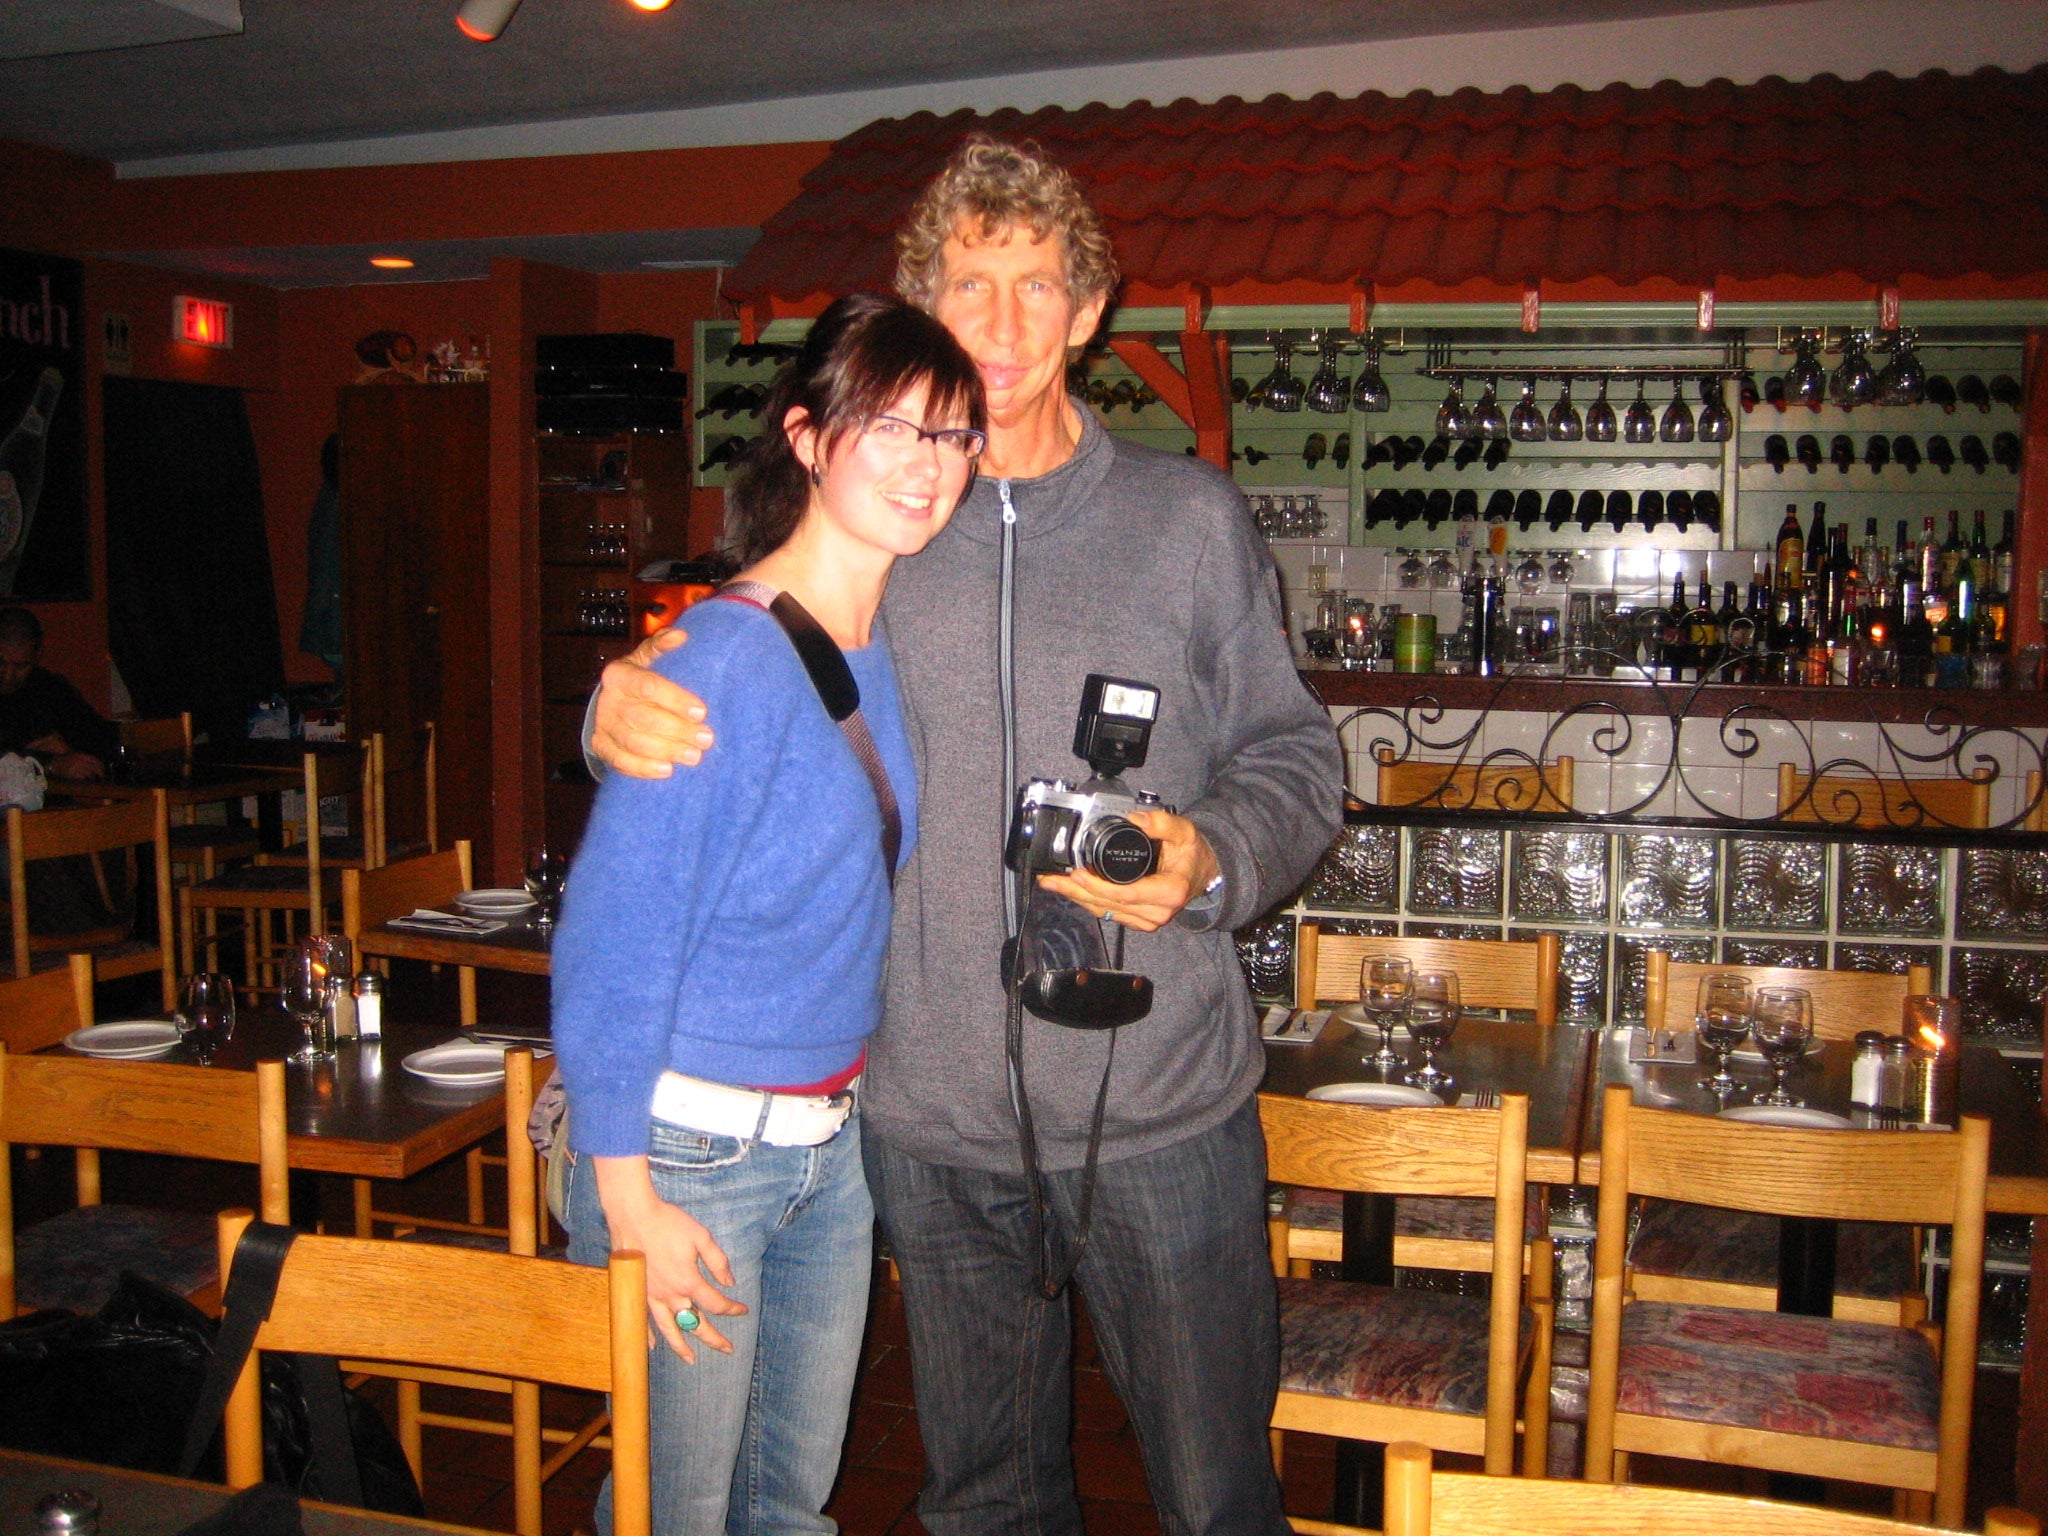 woman in blue sweater and jeans standing next to her father with his arm around her, he's holding a camera with a flash installed on the top in a restaurant